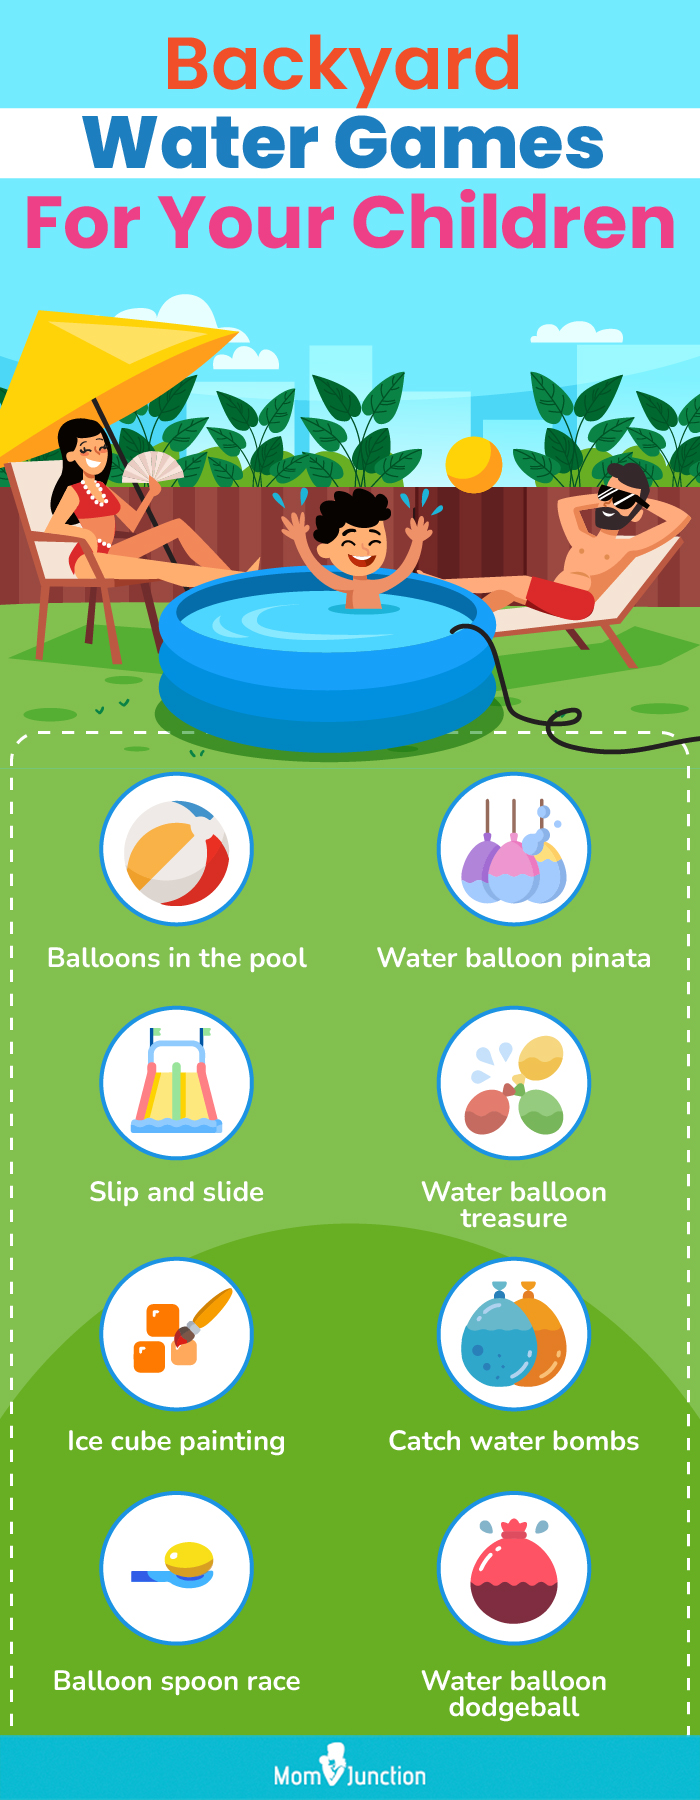 26 Fun Games to Play with Water this Summer - Kid Activities